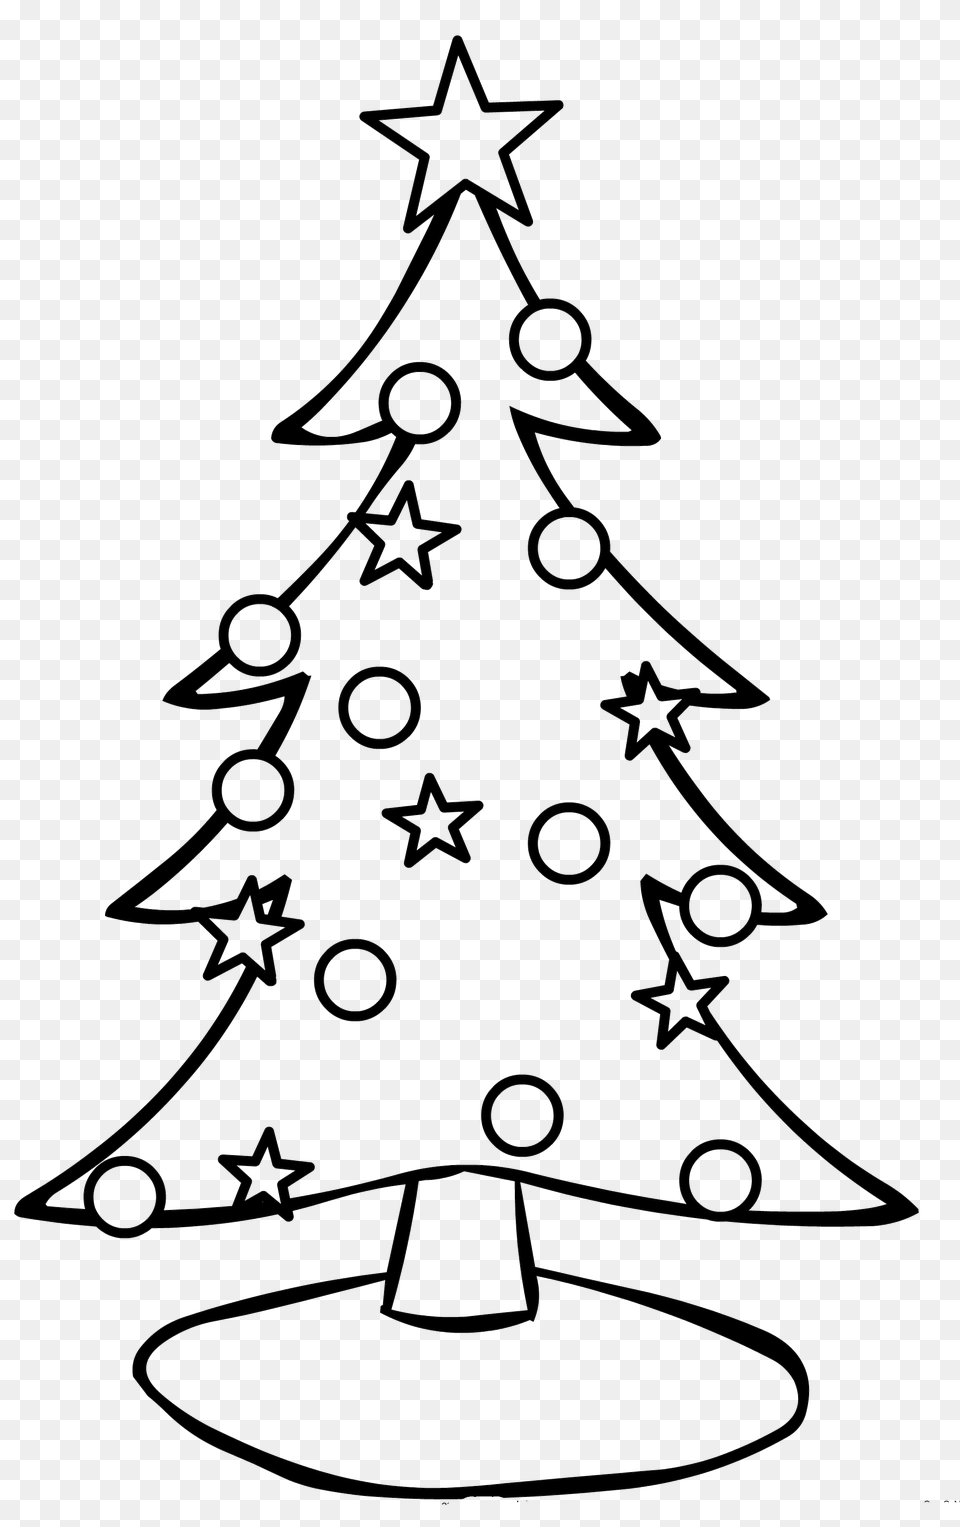 Simple Christmas Tree Coloring Pages Christmas, Christmas Decorations, Festival, Symbol, Star Symbol Free Png Download